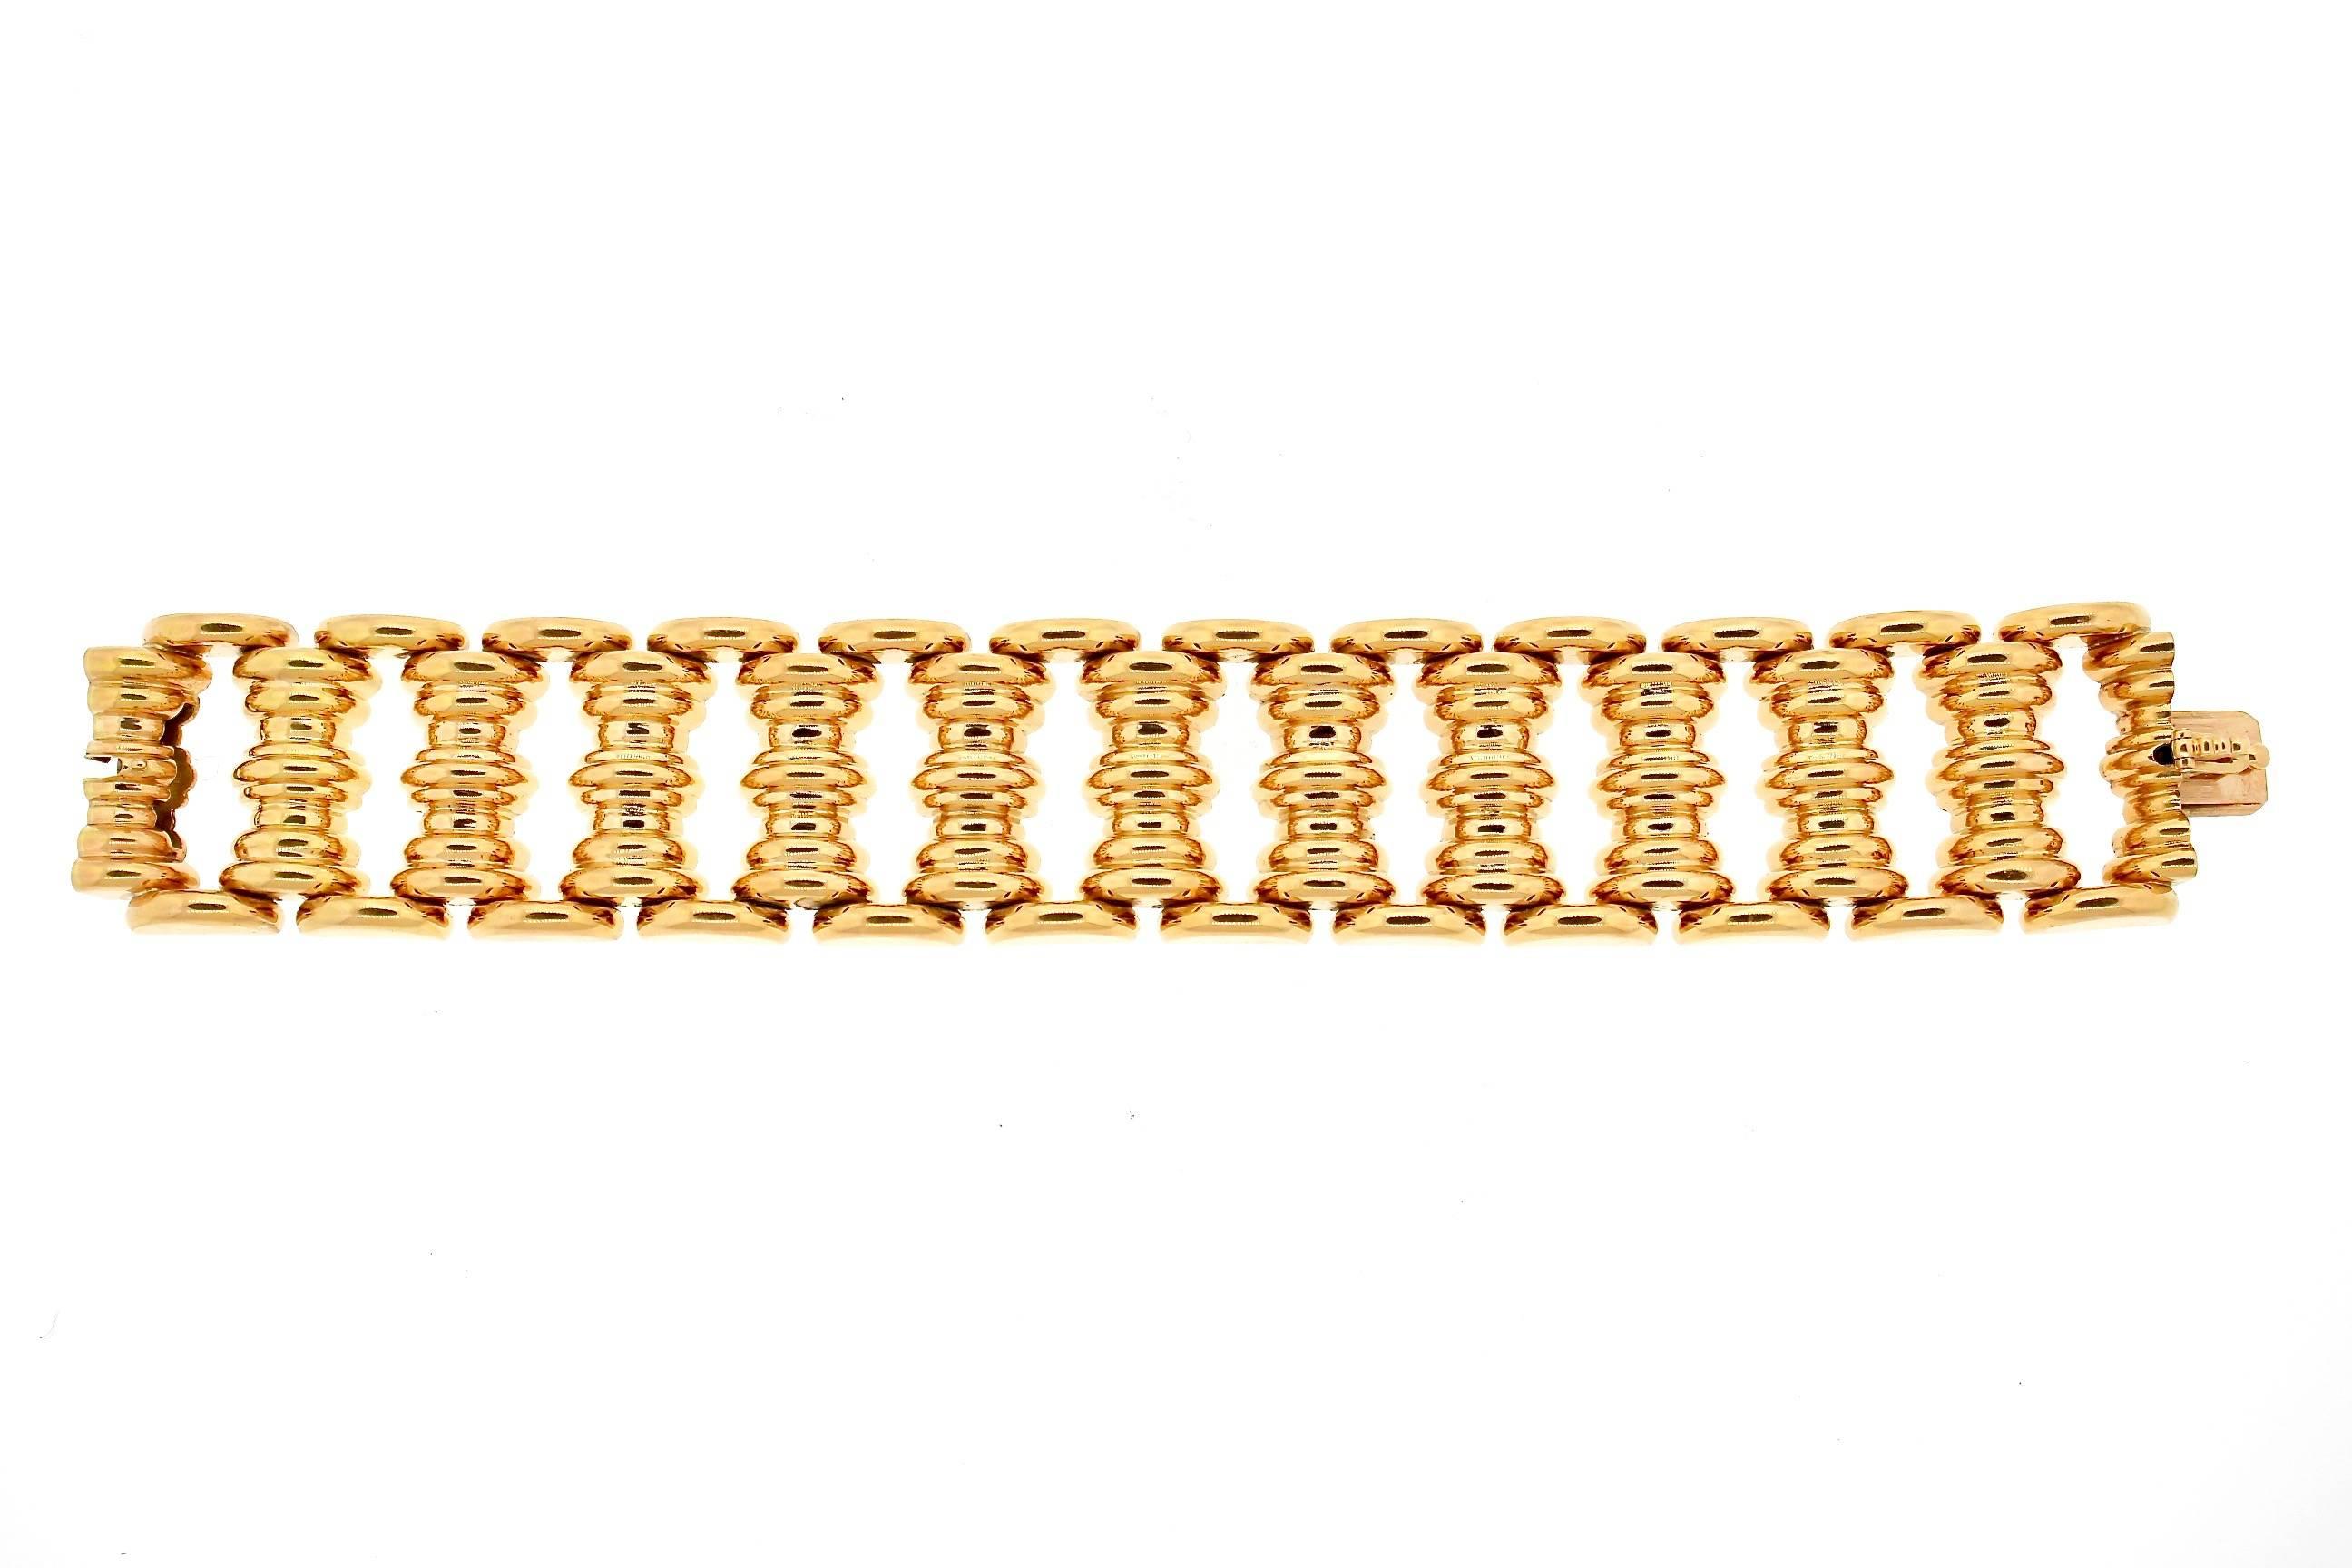 A bold gold bracelet is often a staple in a woman's jewelry collection.  Its sturdy enough to be worn everyday during the day, and yet stylish for all fashions.  This 18k yellow gold Retro tank style bracelet has a polished and elegant link. 